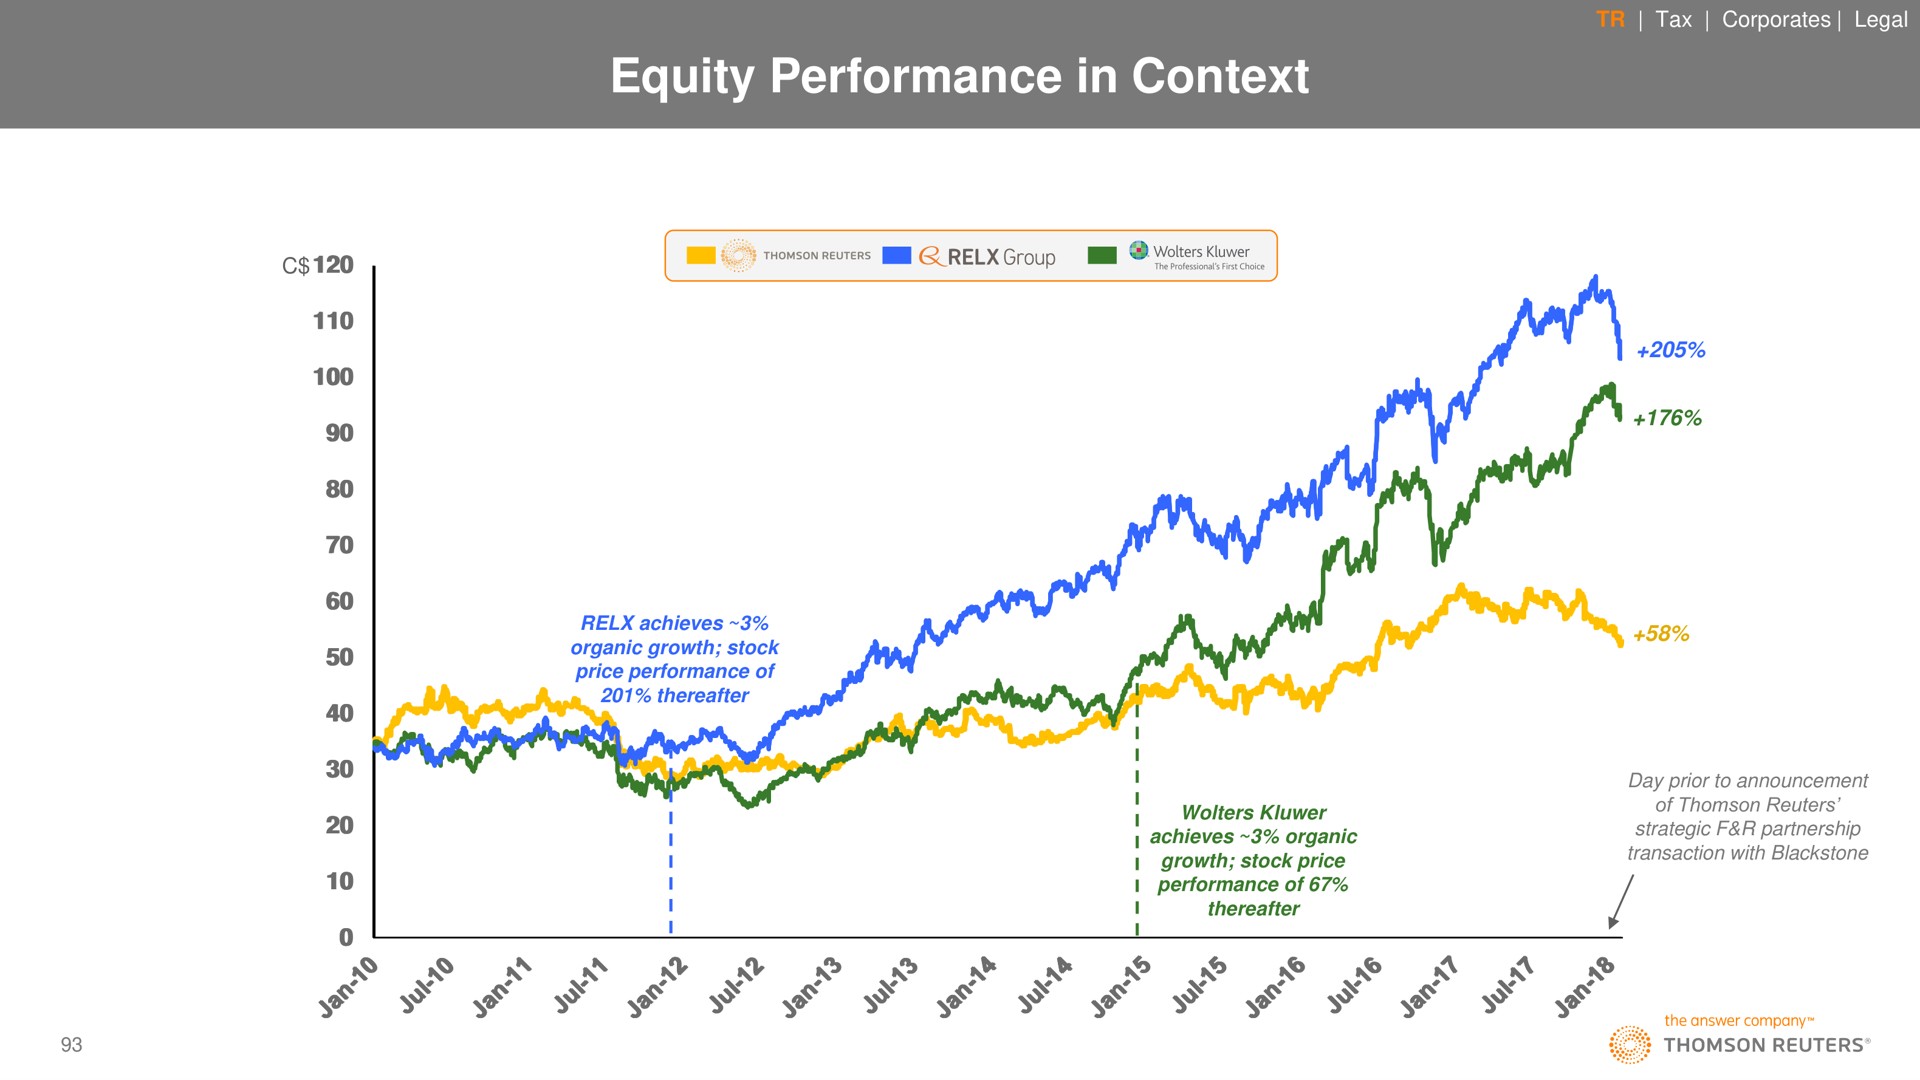 equity performance in context | Thomson Reuters